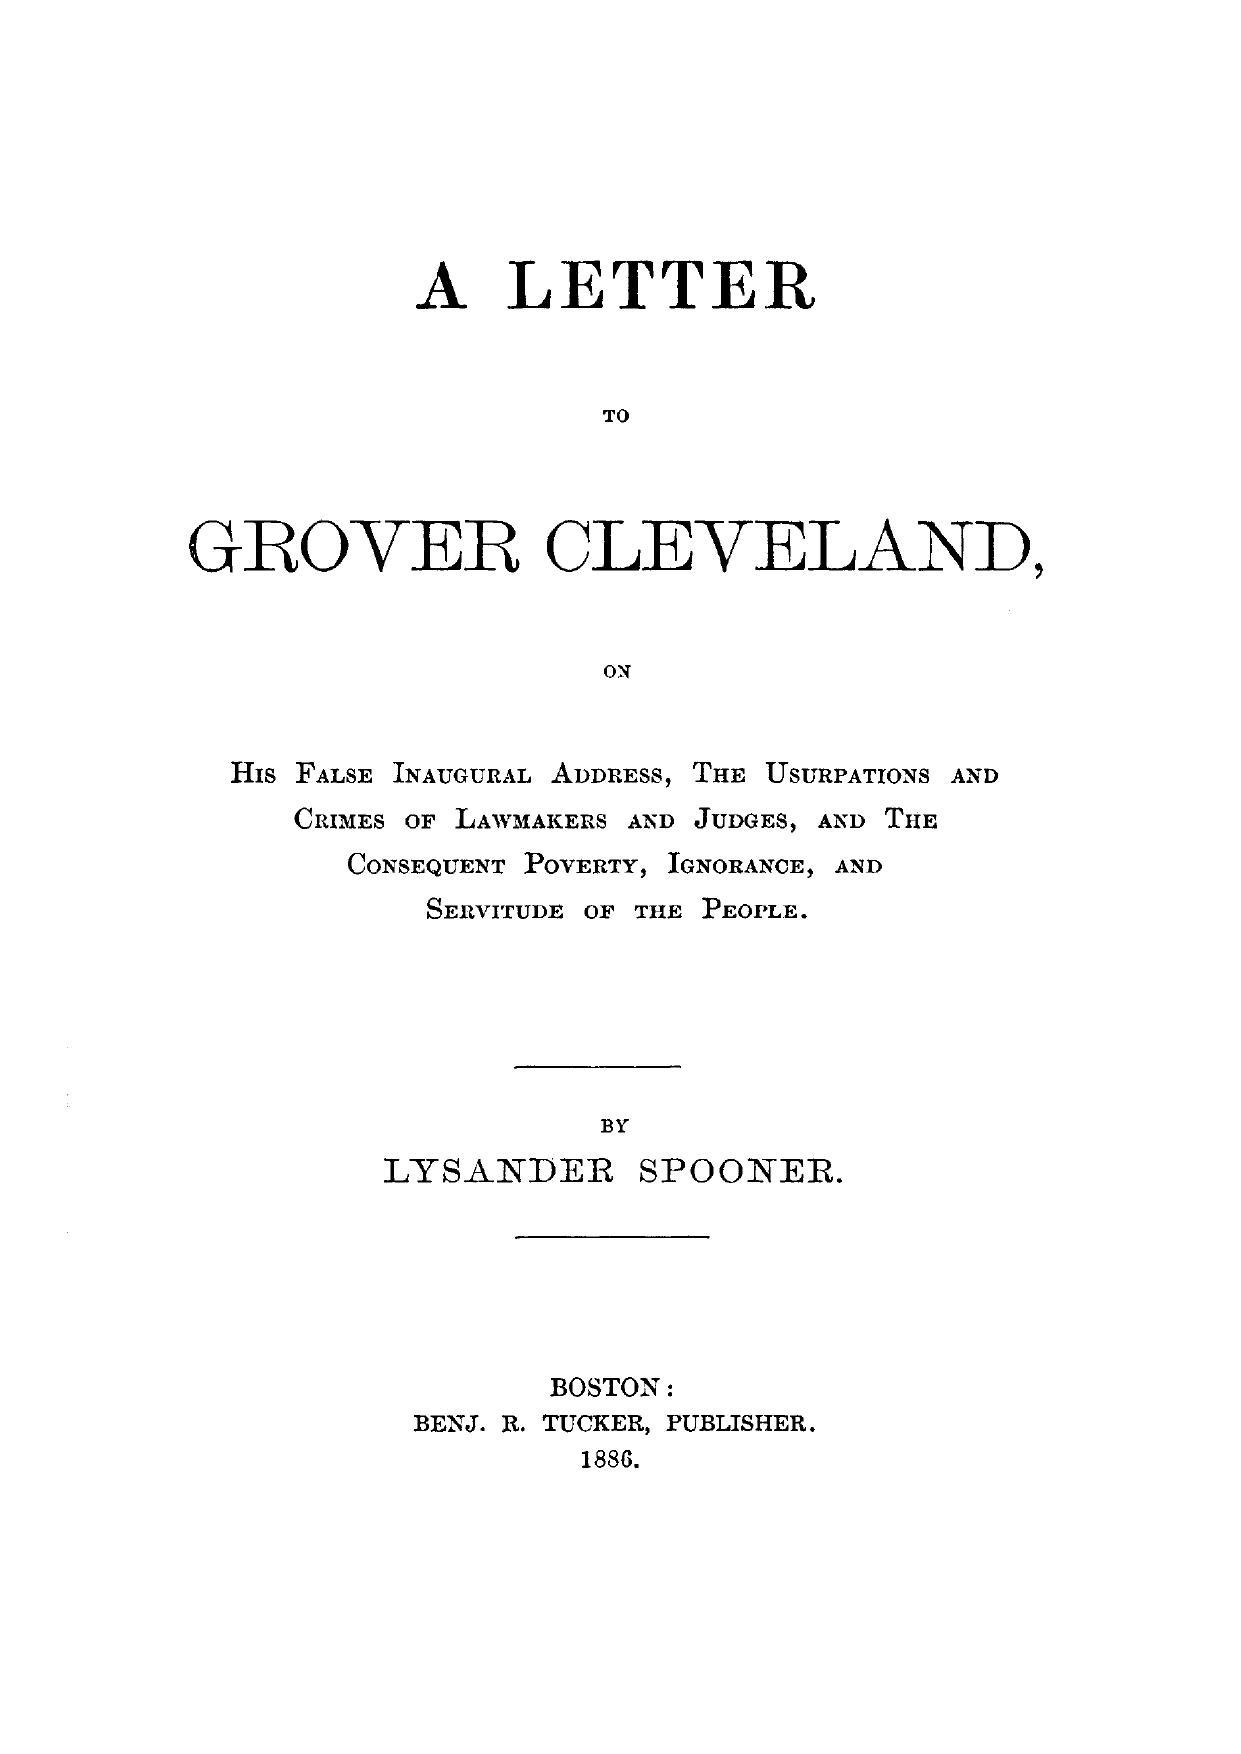 A Letter To Grover Cleveland (1886) by Lysander Spooner